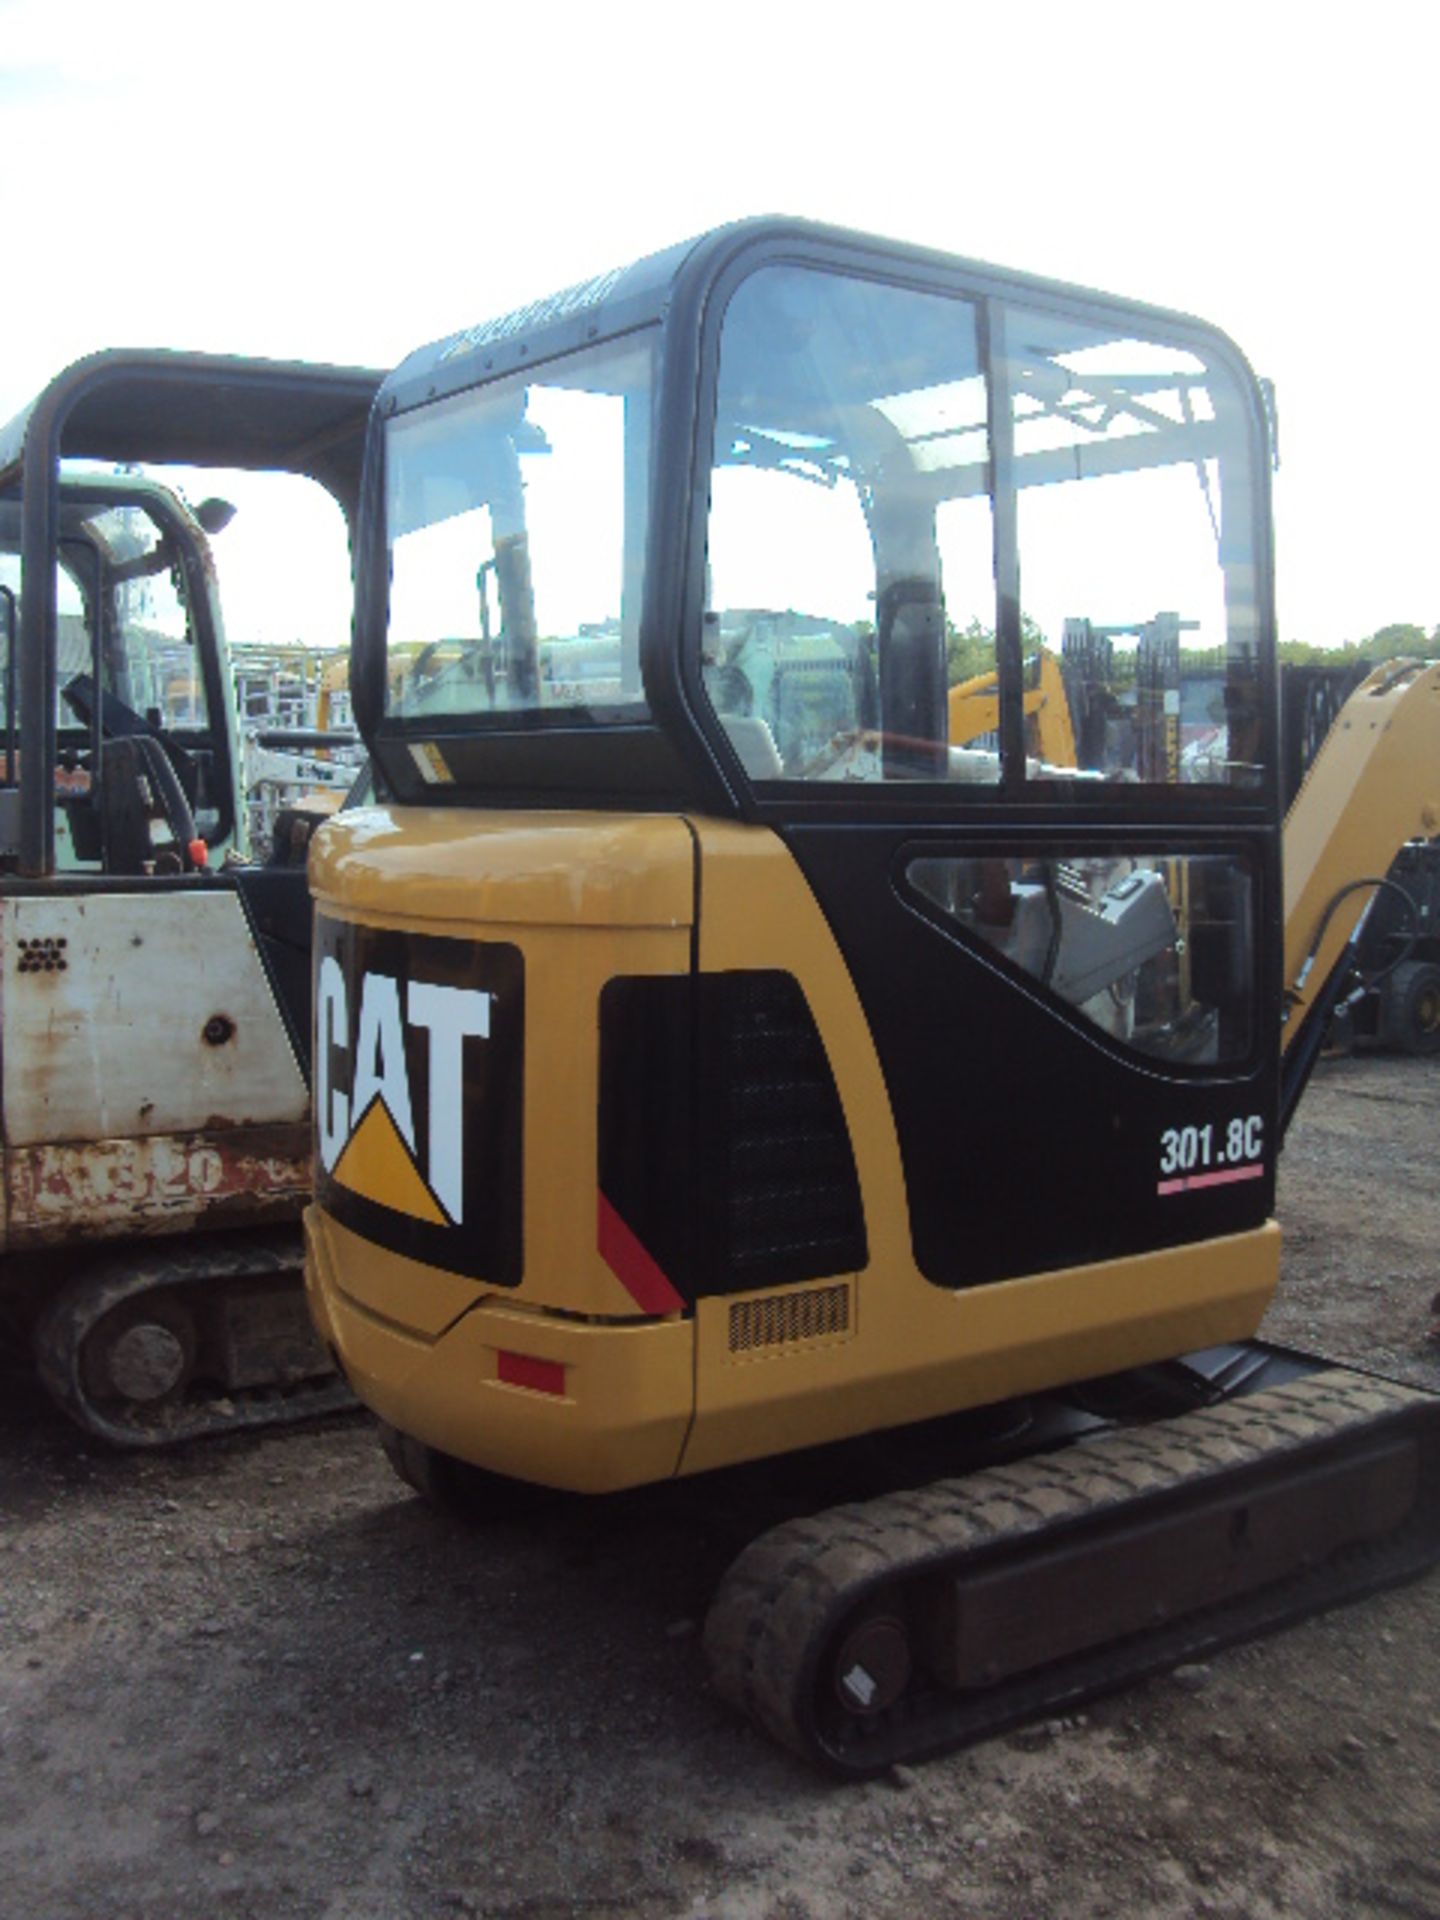 CATERPILLAR 301.8 rubber tracked excavator S/n:CLJSB00648  with 2 buckets, blade, piped, cab & - Image 3 of 5